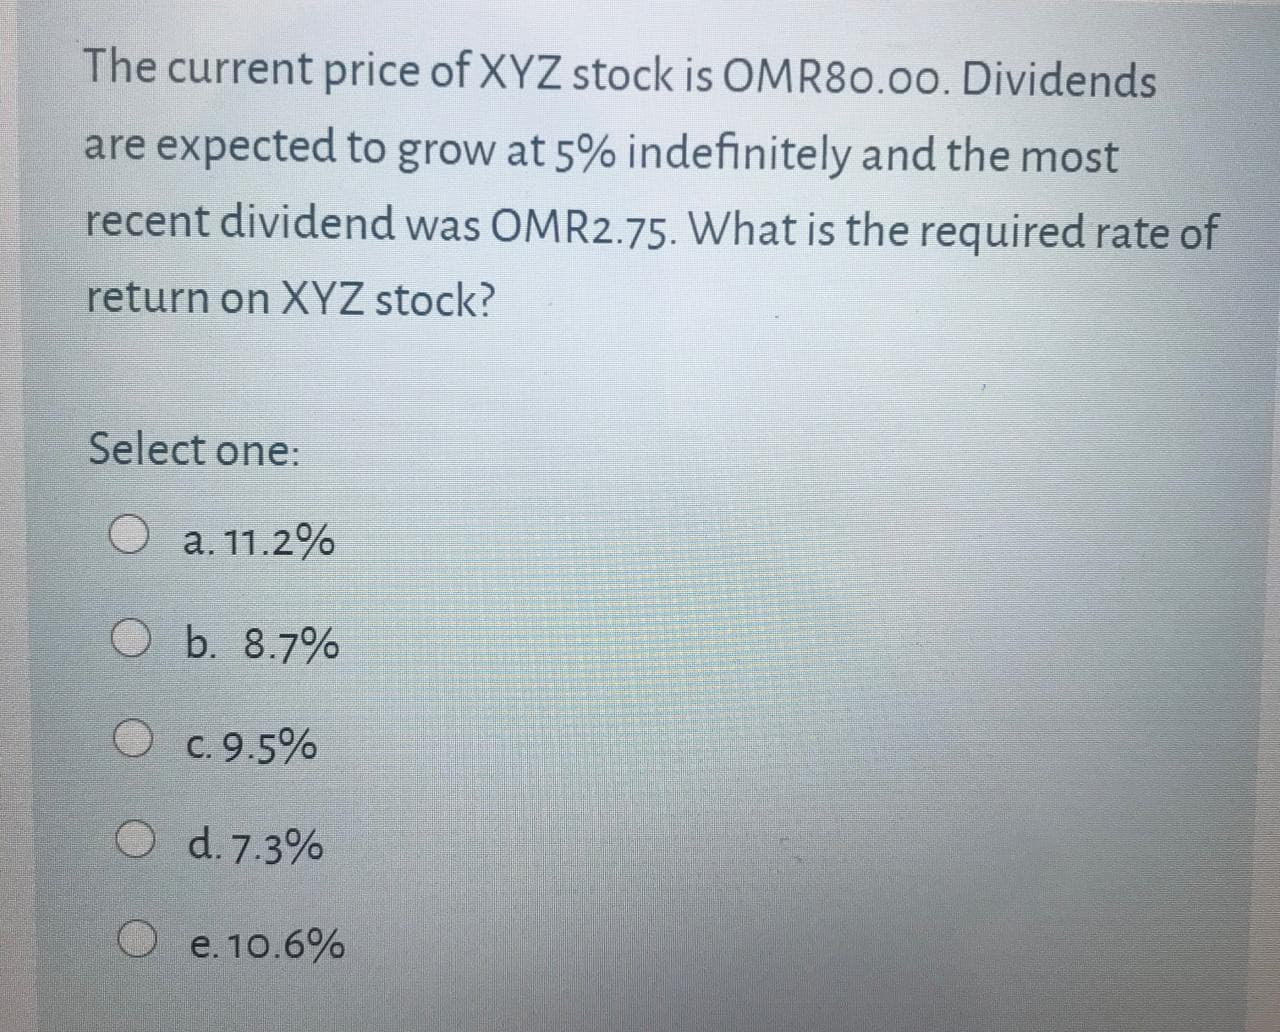 The current price of XYZ stock is OMR80.00. Dividends
are expected to grow at 5% indefinitely and the most
recent dividend was OMR2.75. What is the required rate of
return on XYZ stock?
